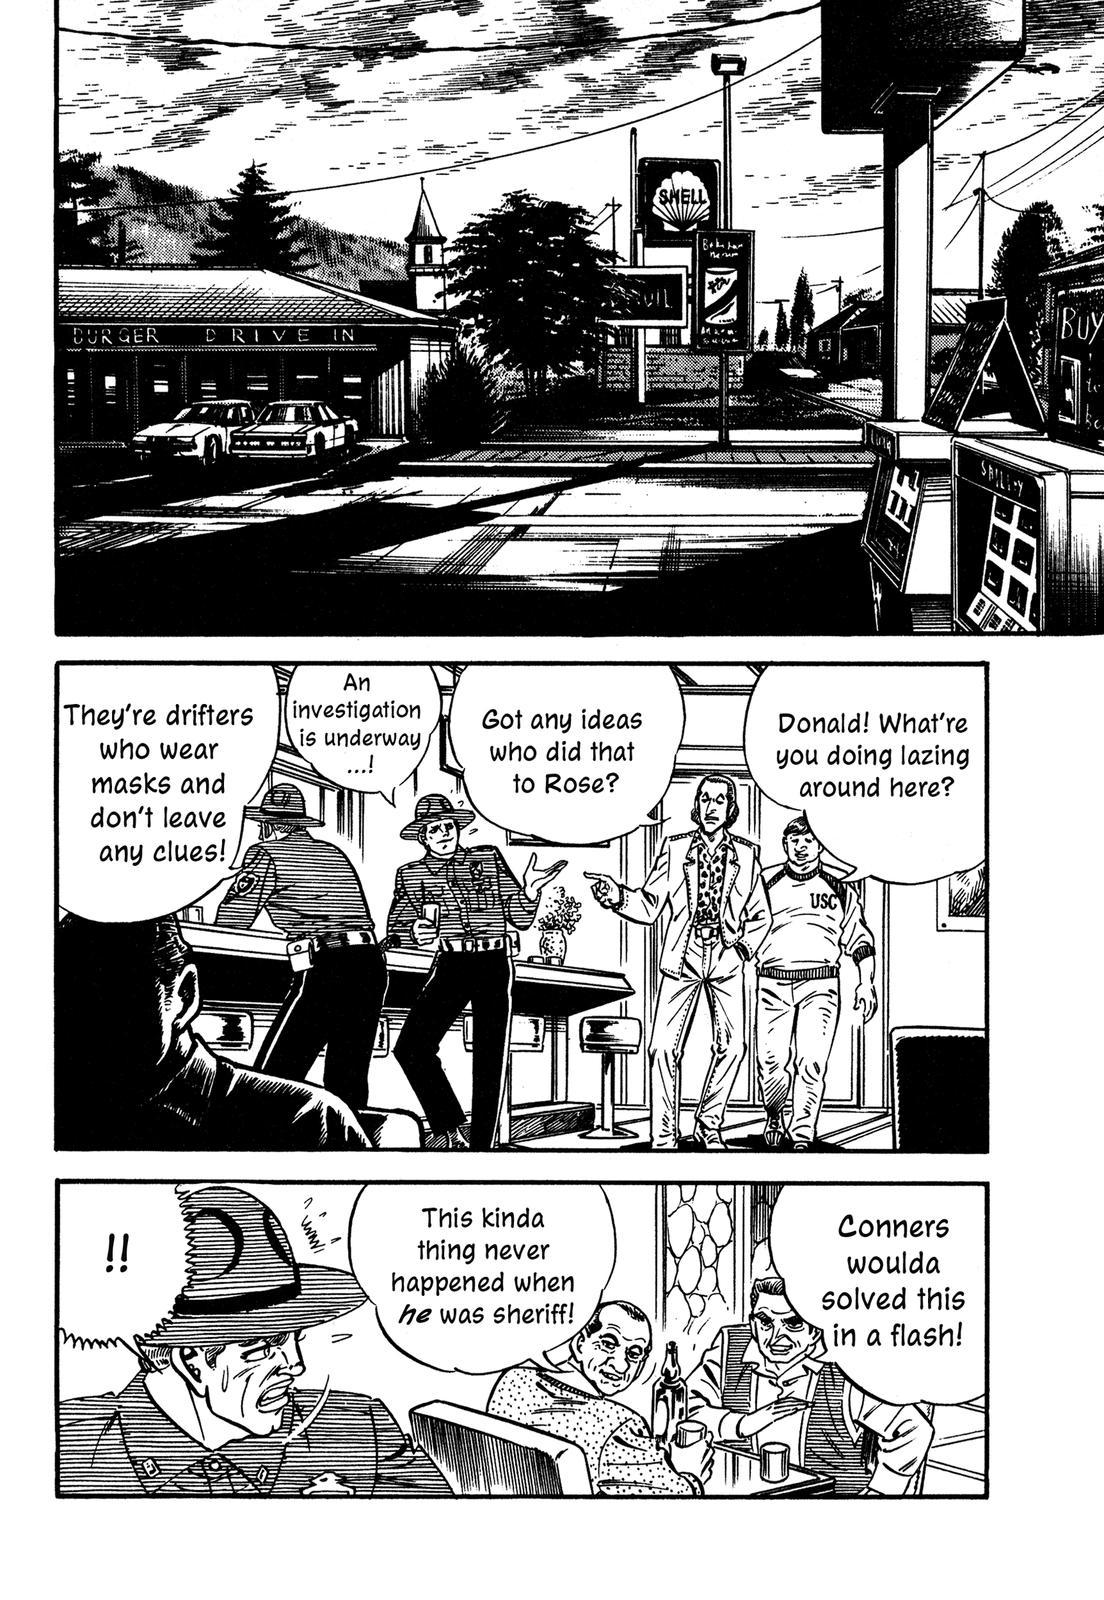 Doll: The Hotel Detective Vol. 2 Ch. 9 A Town Surrounded by Mountains